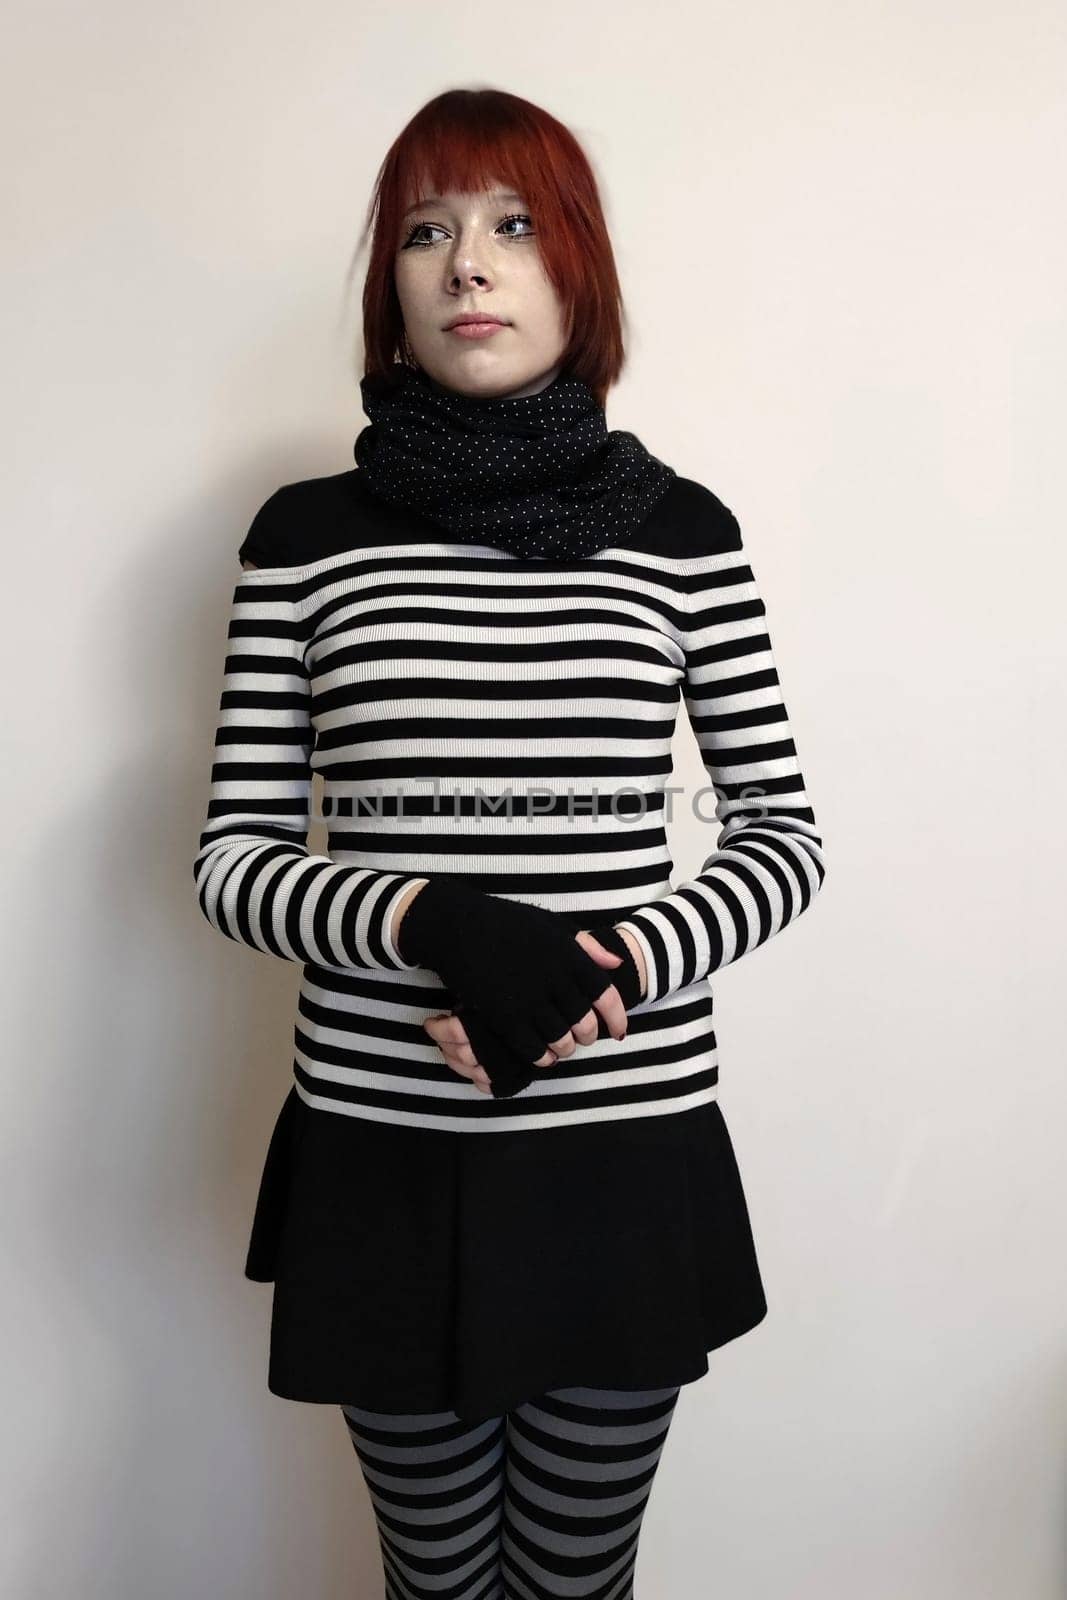 red-haired teen girl in striped clothes on a white background.